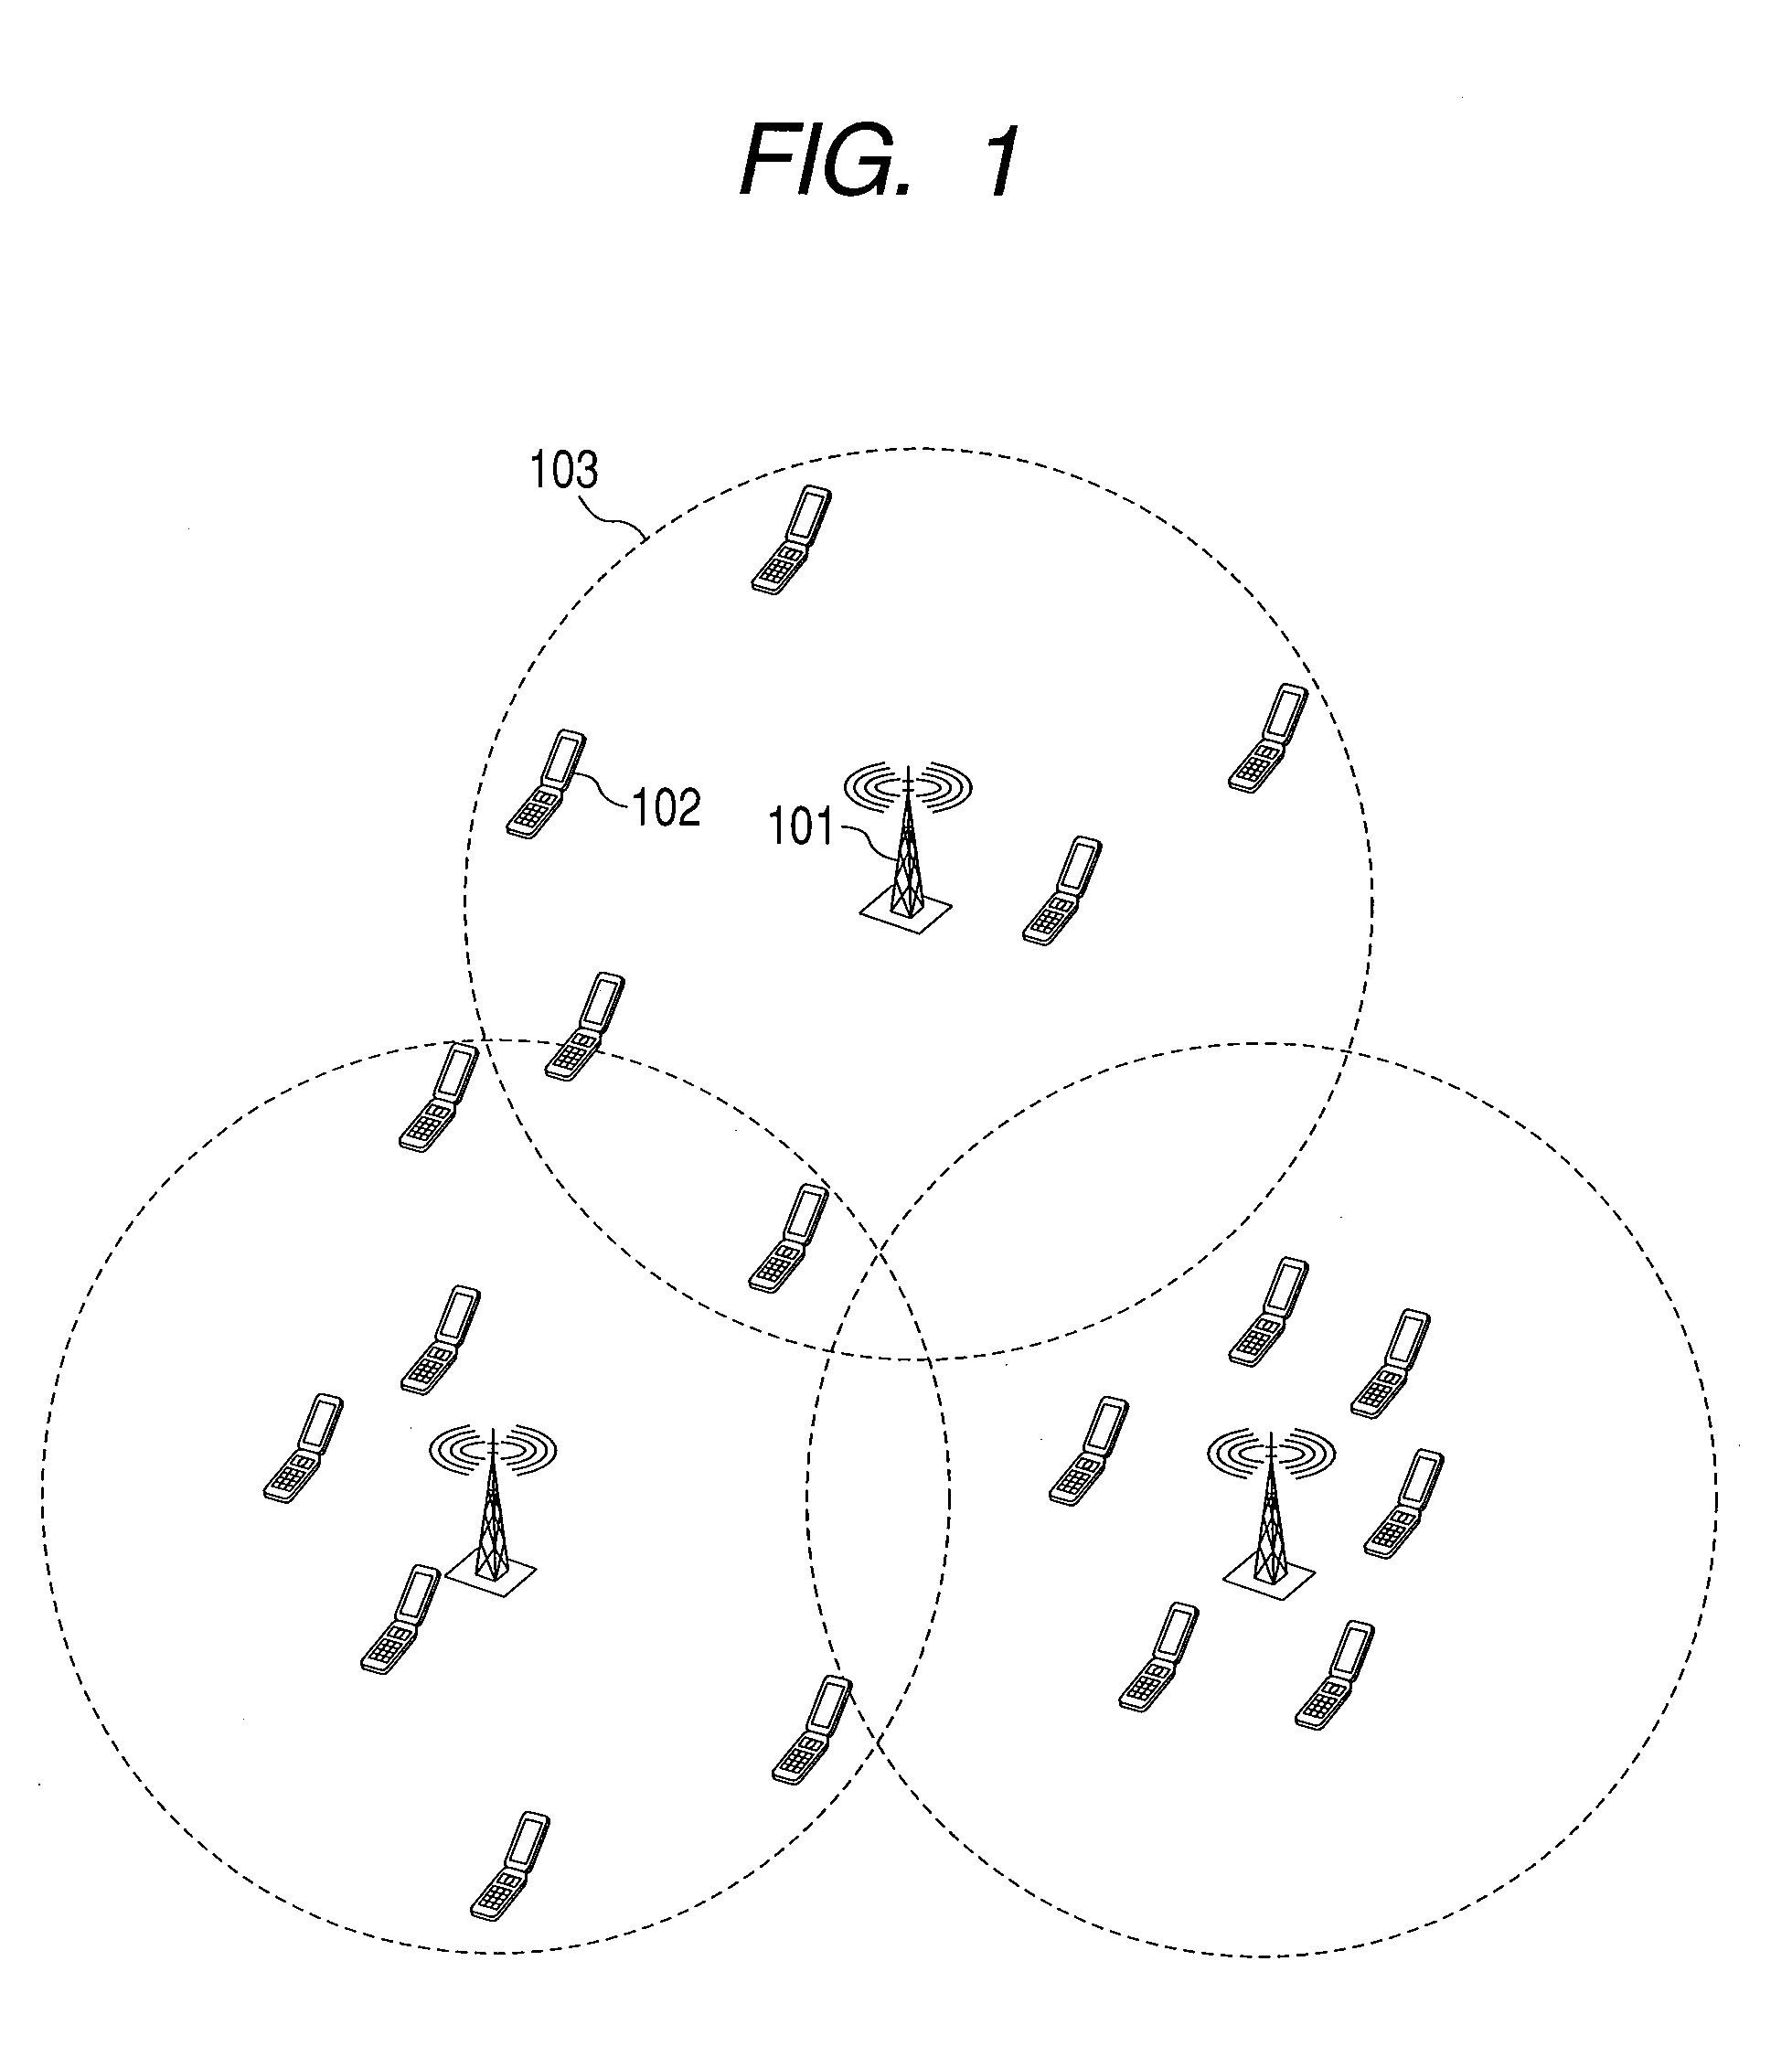 Radio communications system, base station apparatus, gateway apparatus, and remote controller